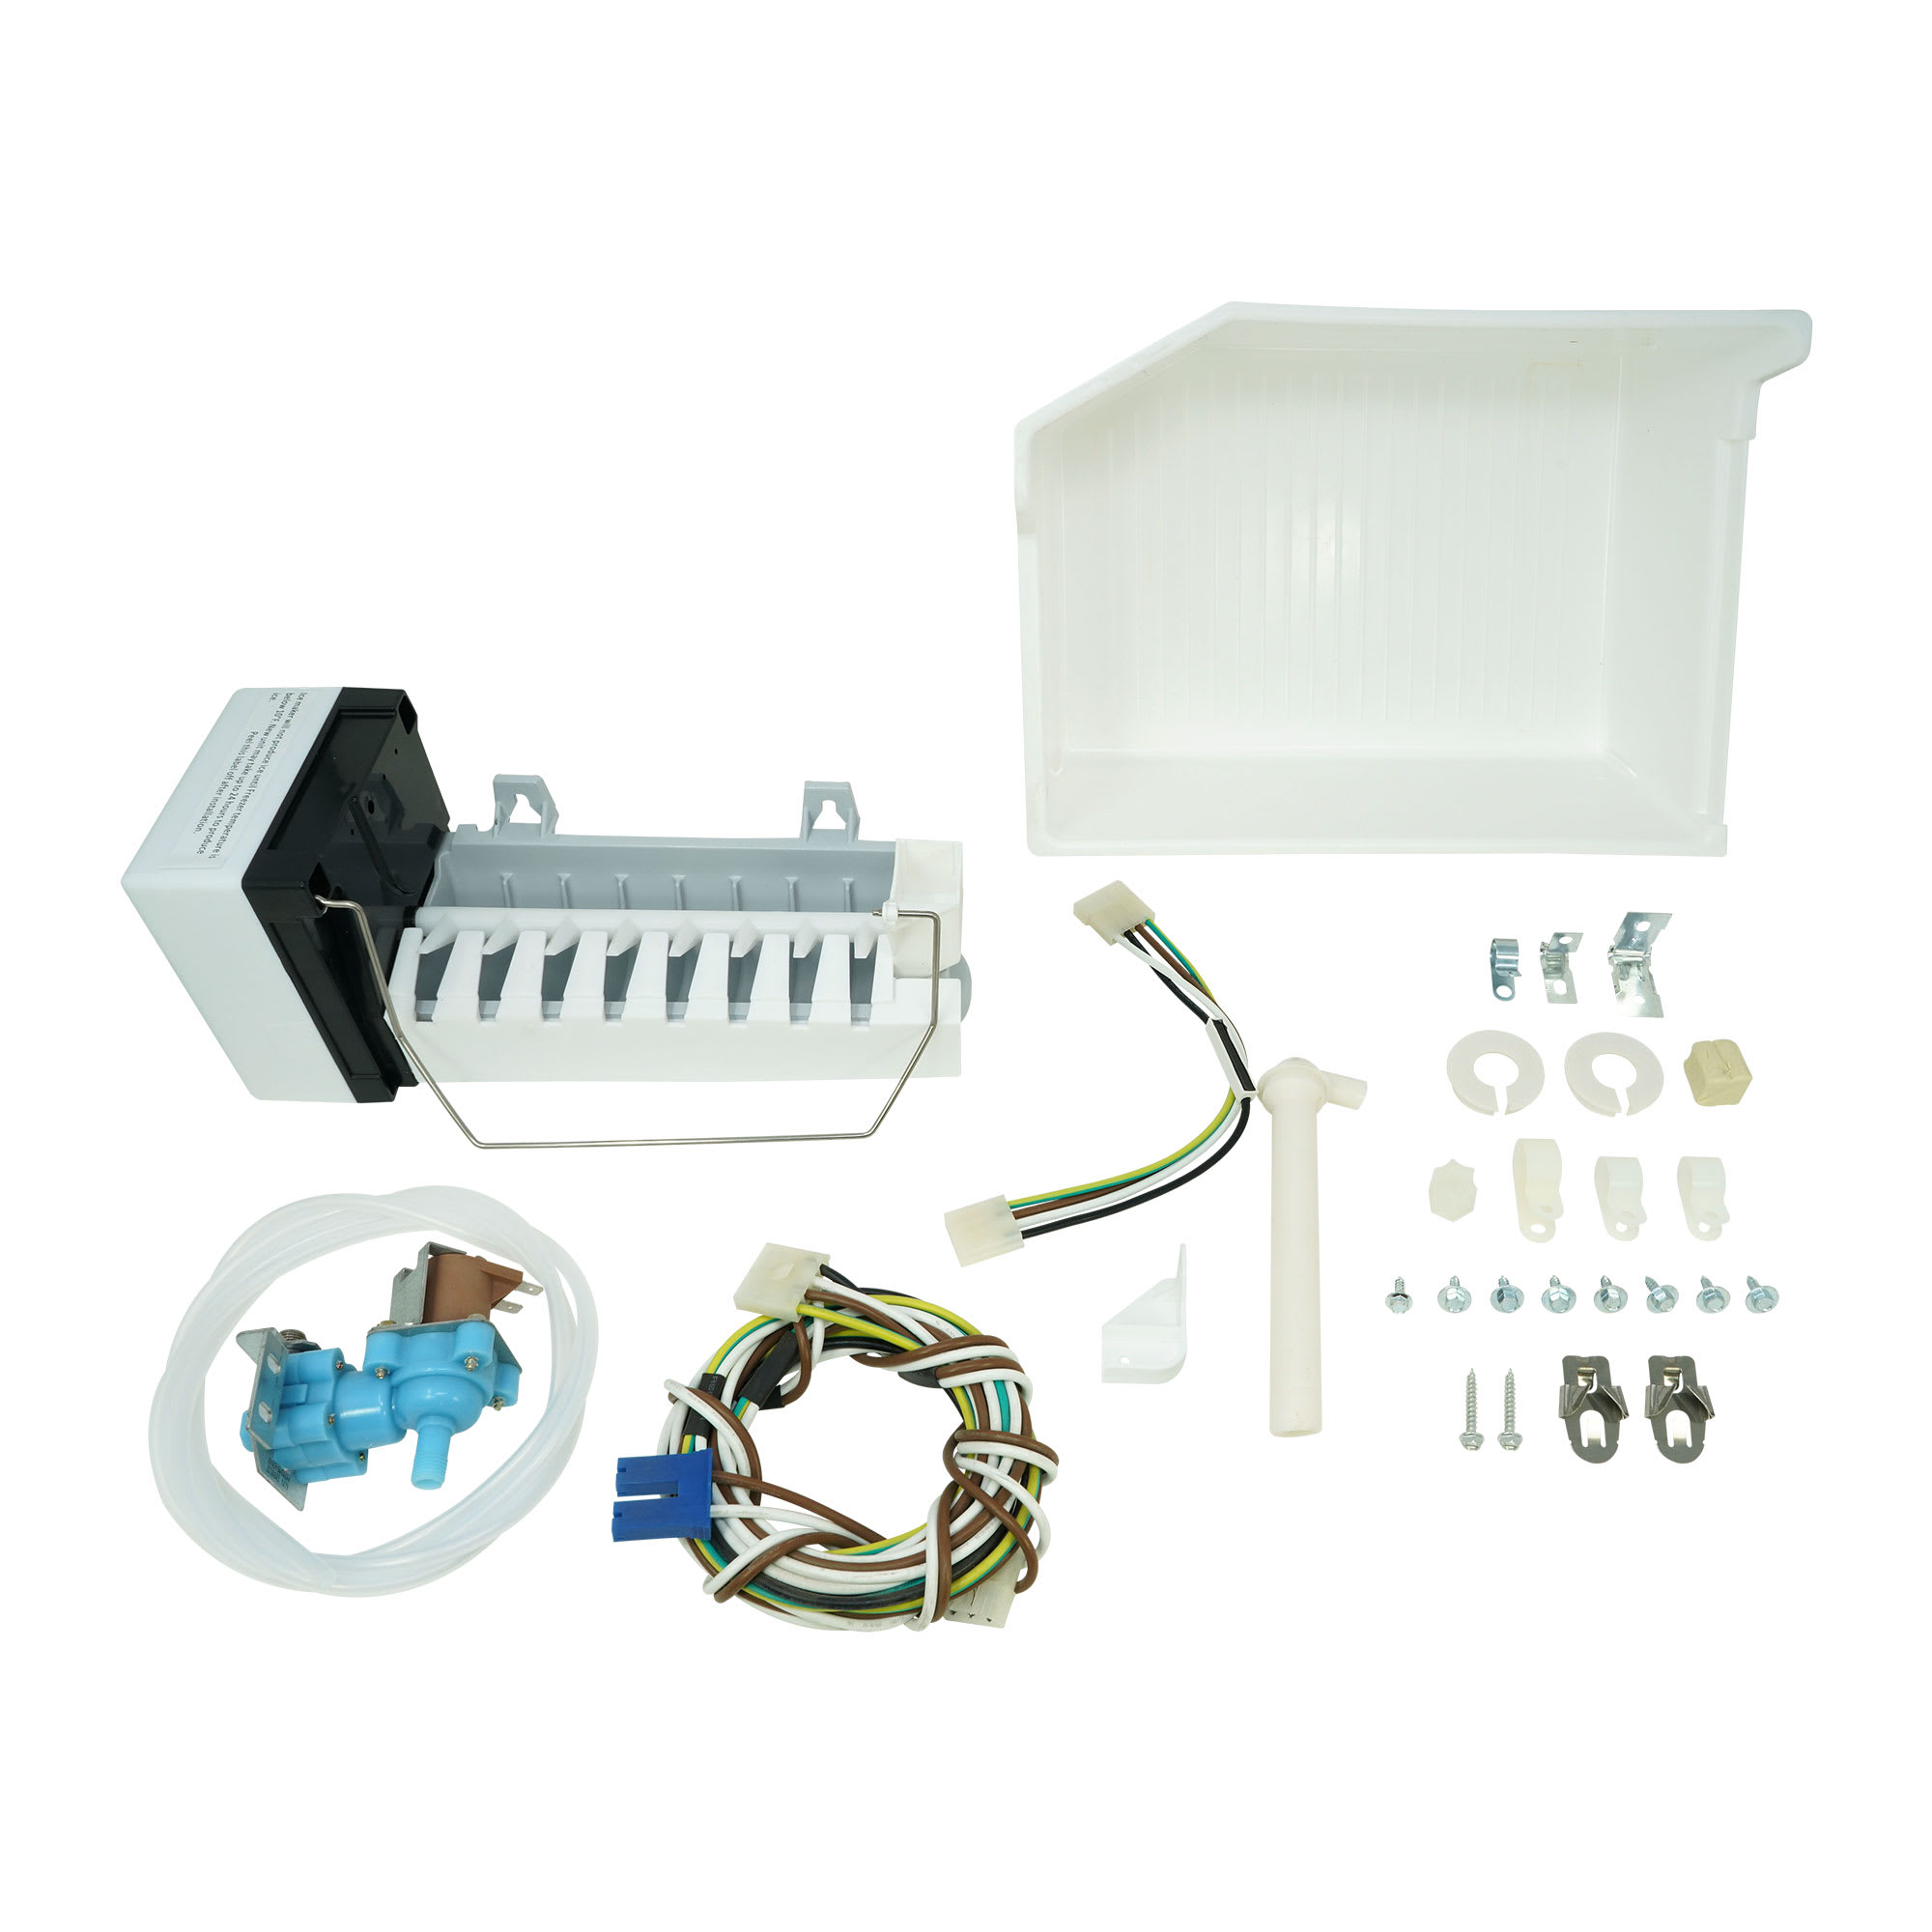 Supco Ice Maker Kit Replacement for Whirlpool 1129316 and ECKMF-90 - RIM316